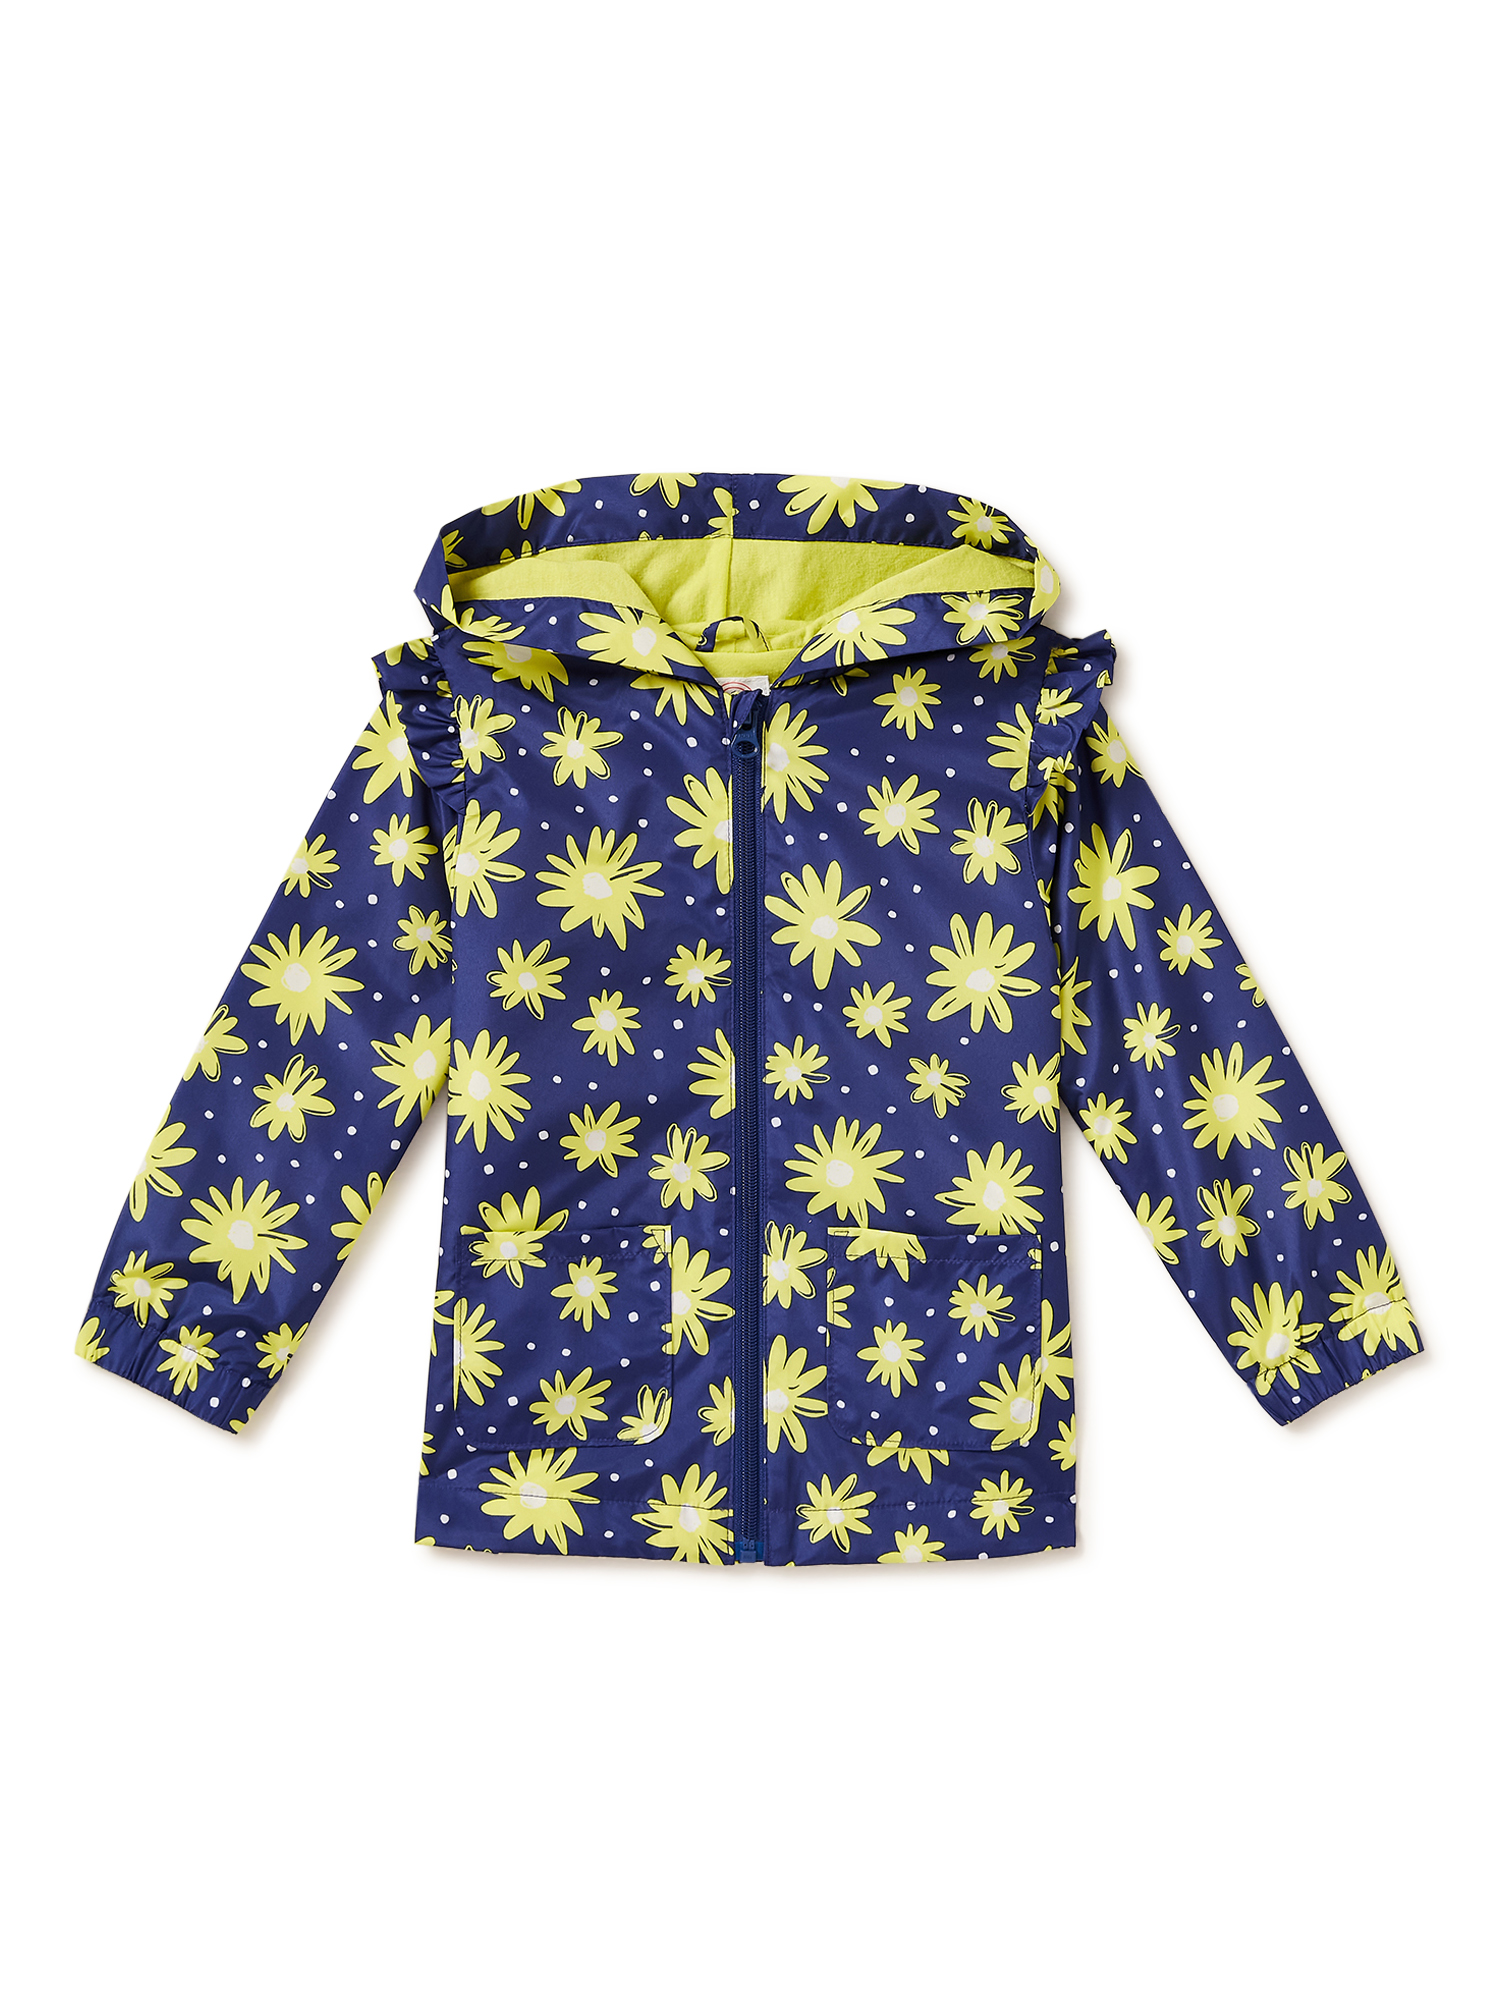 Wonder Nation Long Sleeve Relaxed Fit Printed Jacket (Infant or Toddler) 1 Pack - image 1 of 4